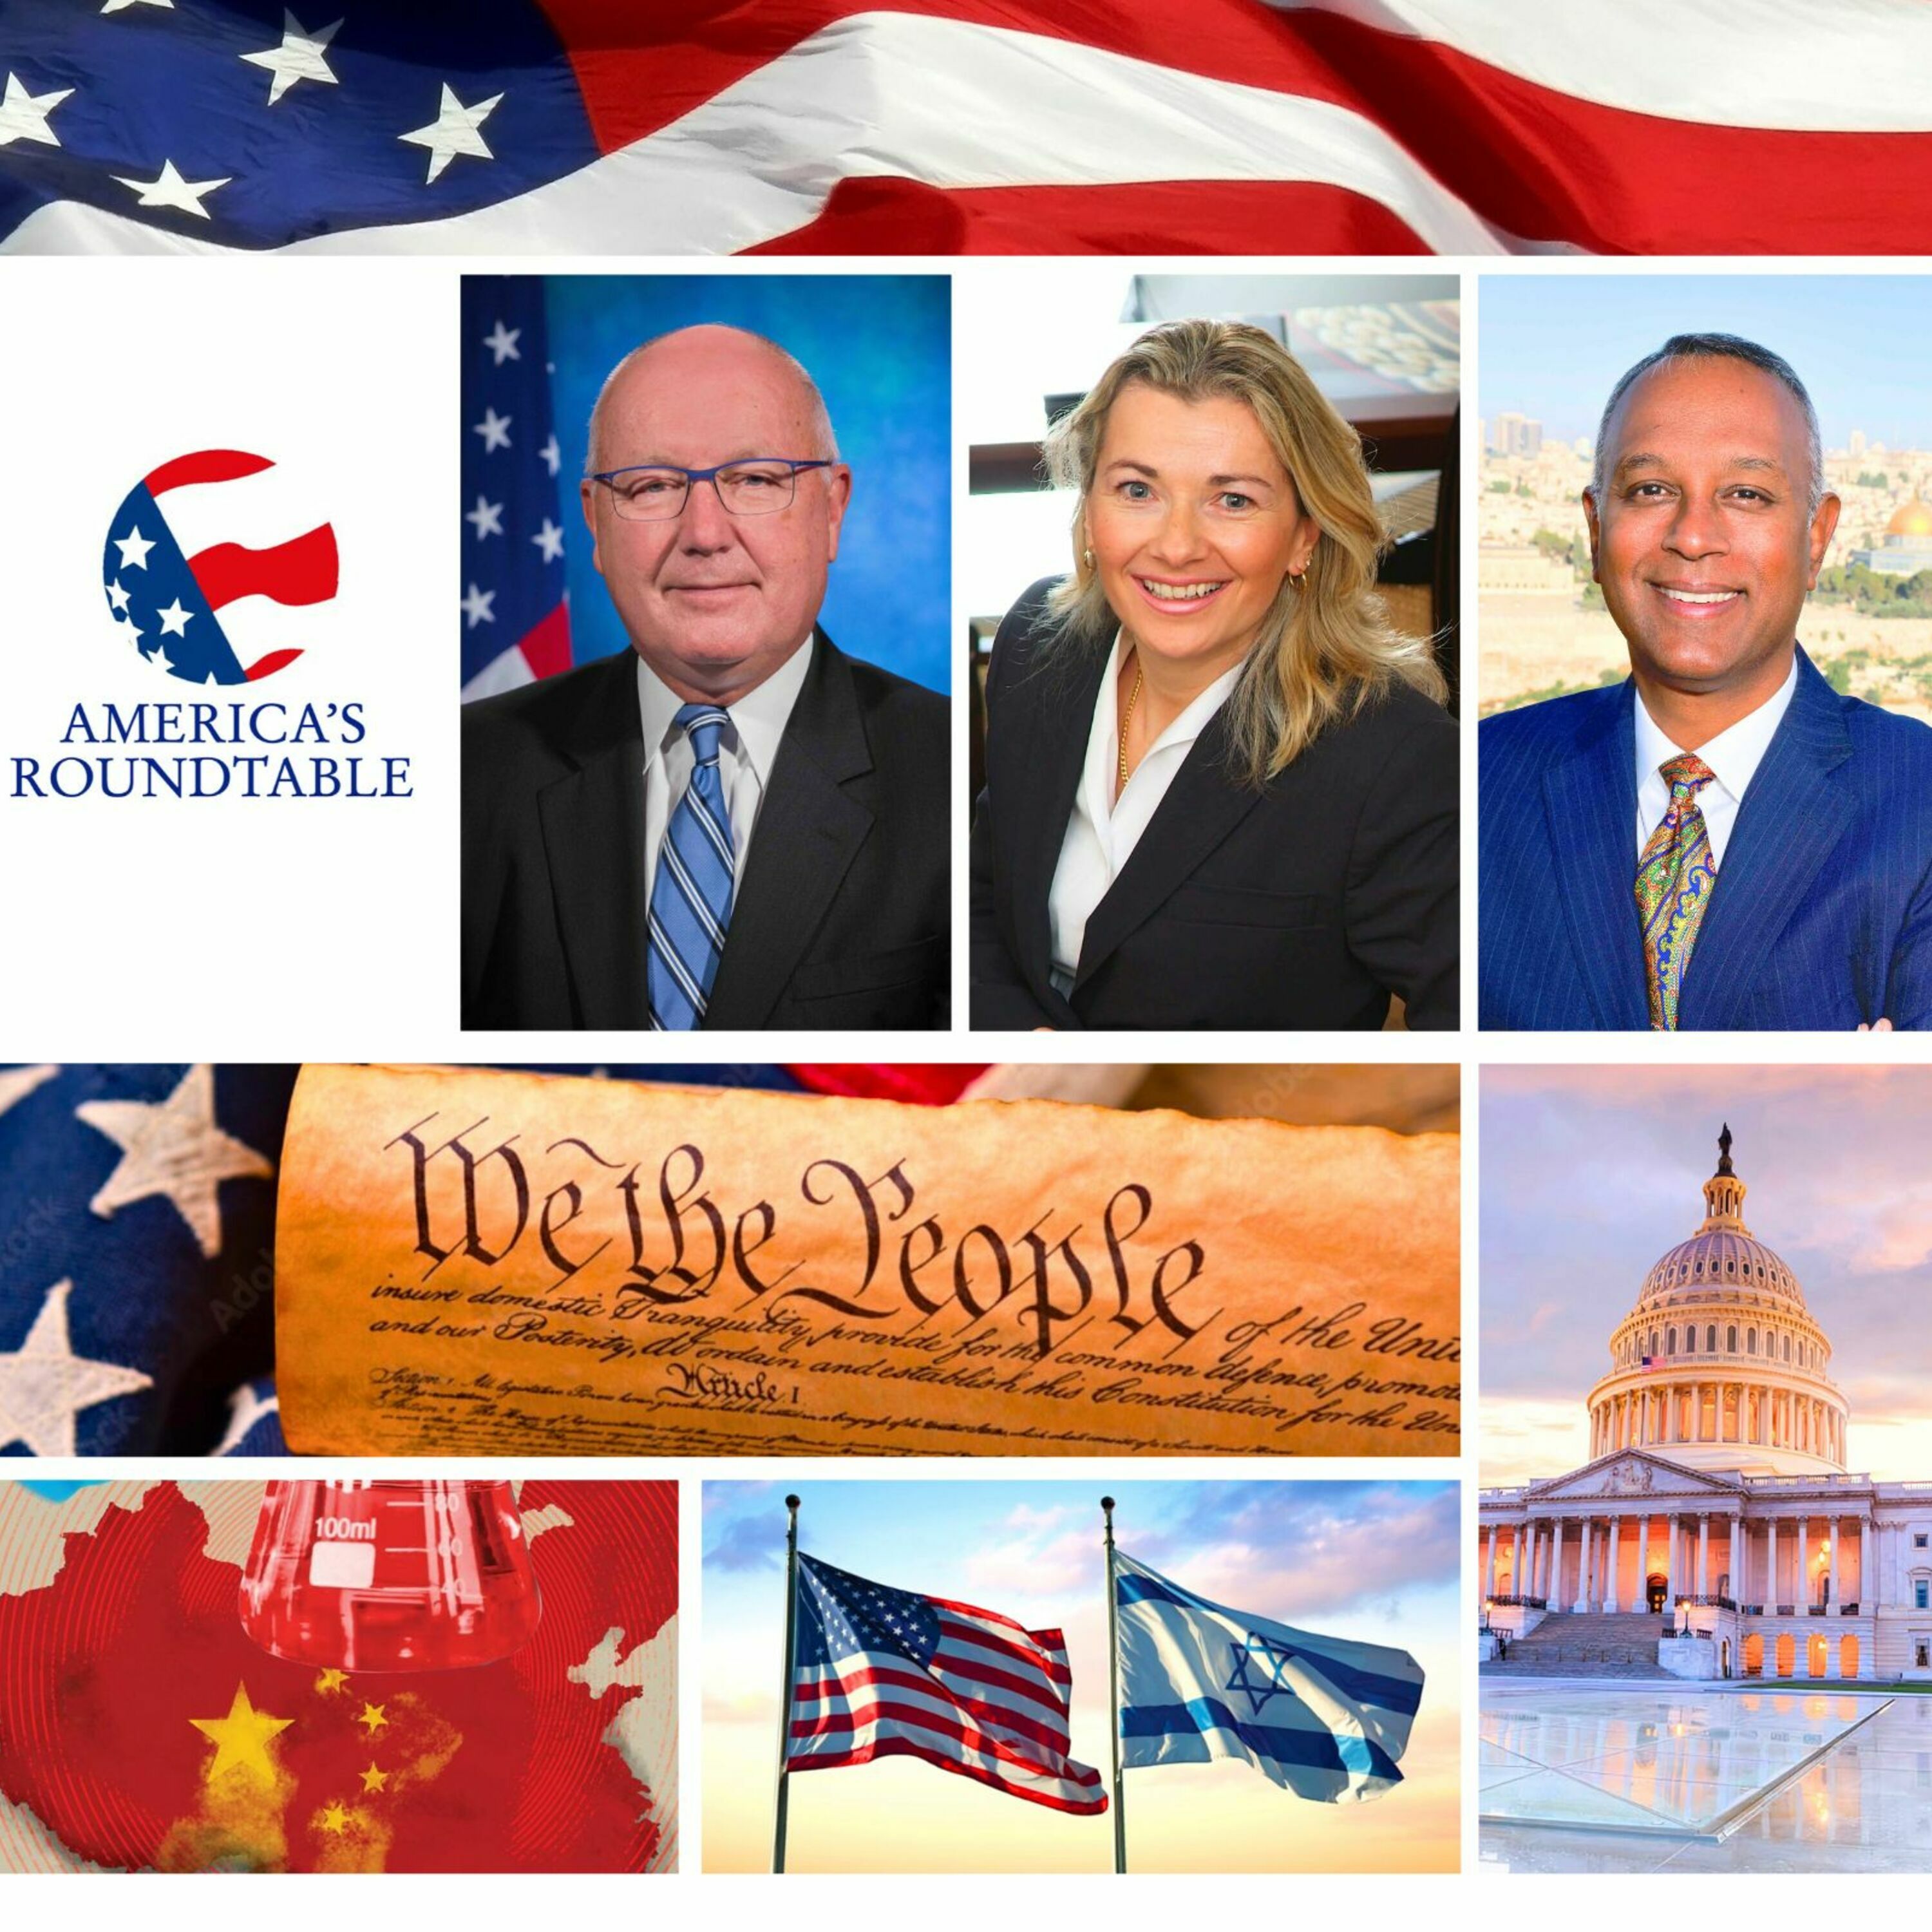 America's Roundtable with Amb. Peter Hoekstra | US Economy, Security and Border Crisis | Biden's US-Israel Dangerous Policy Pivot | National Security Concerns as Michigan's Governor Whitmer Woos China